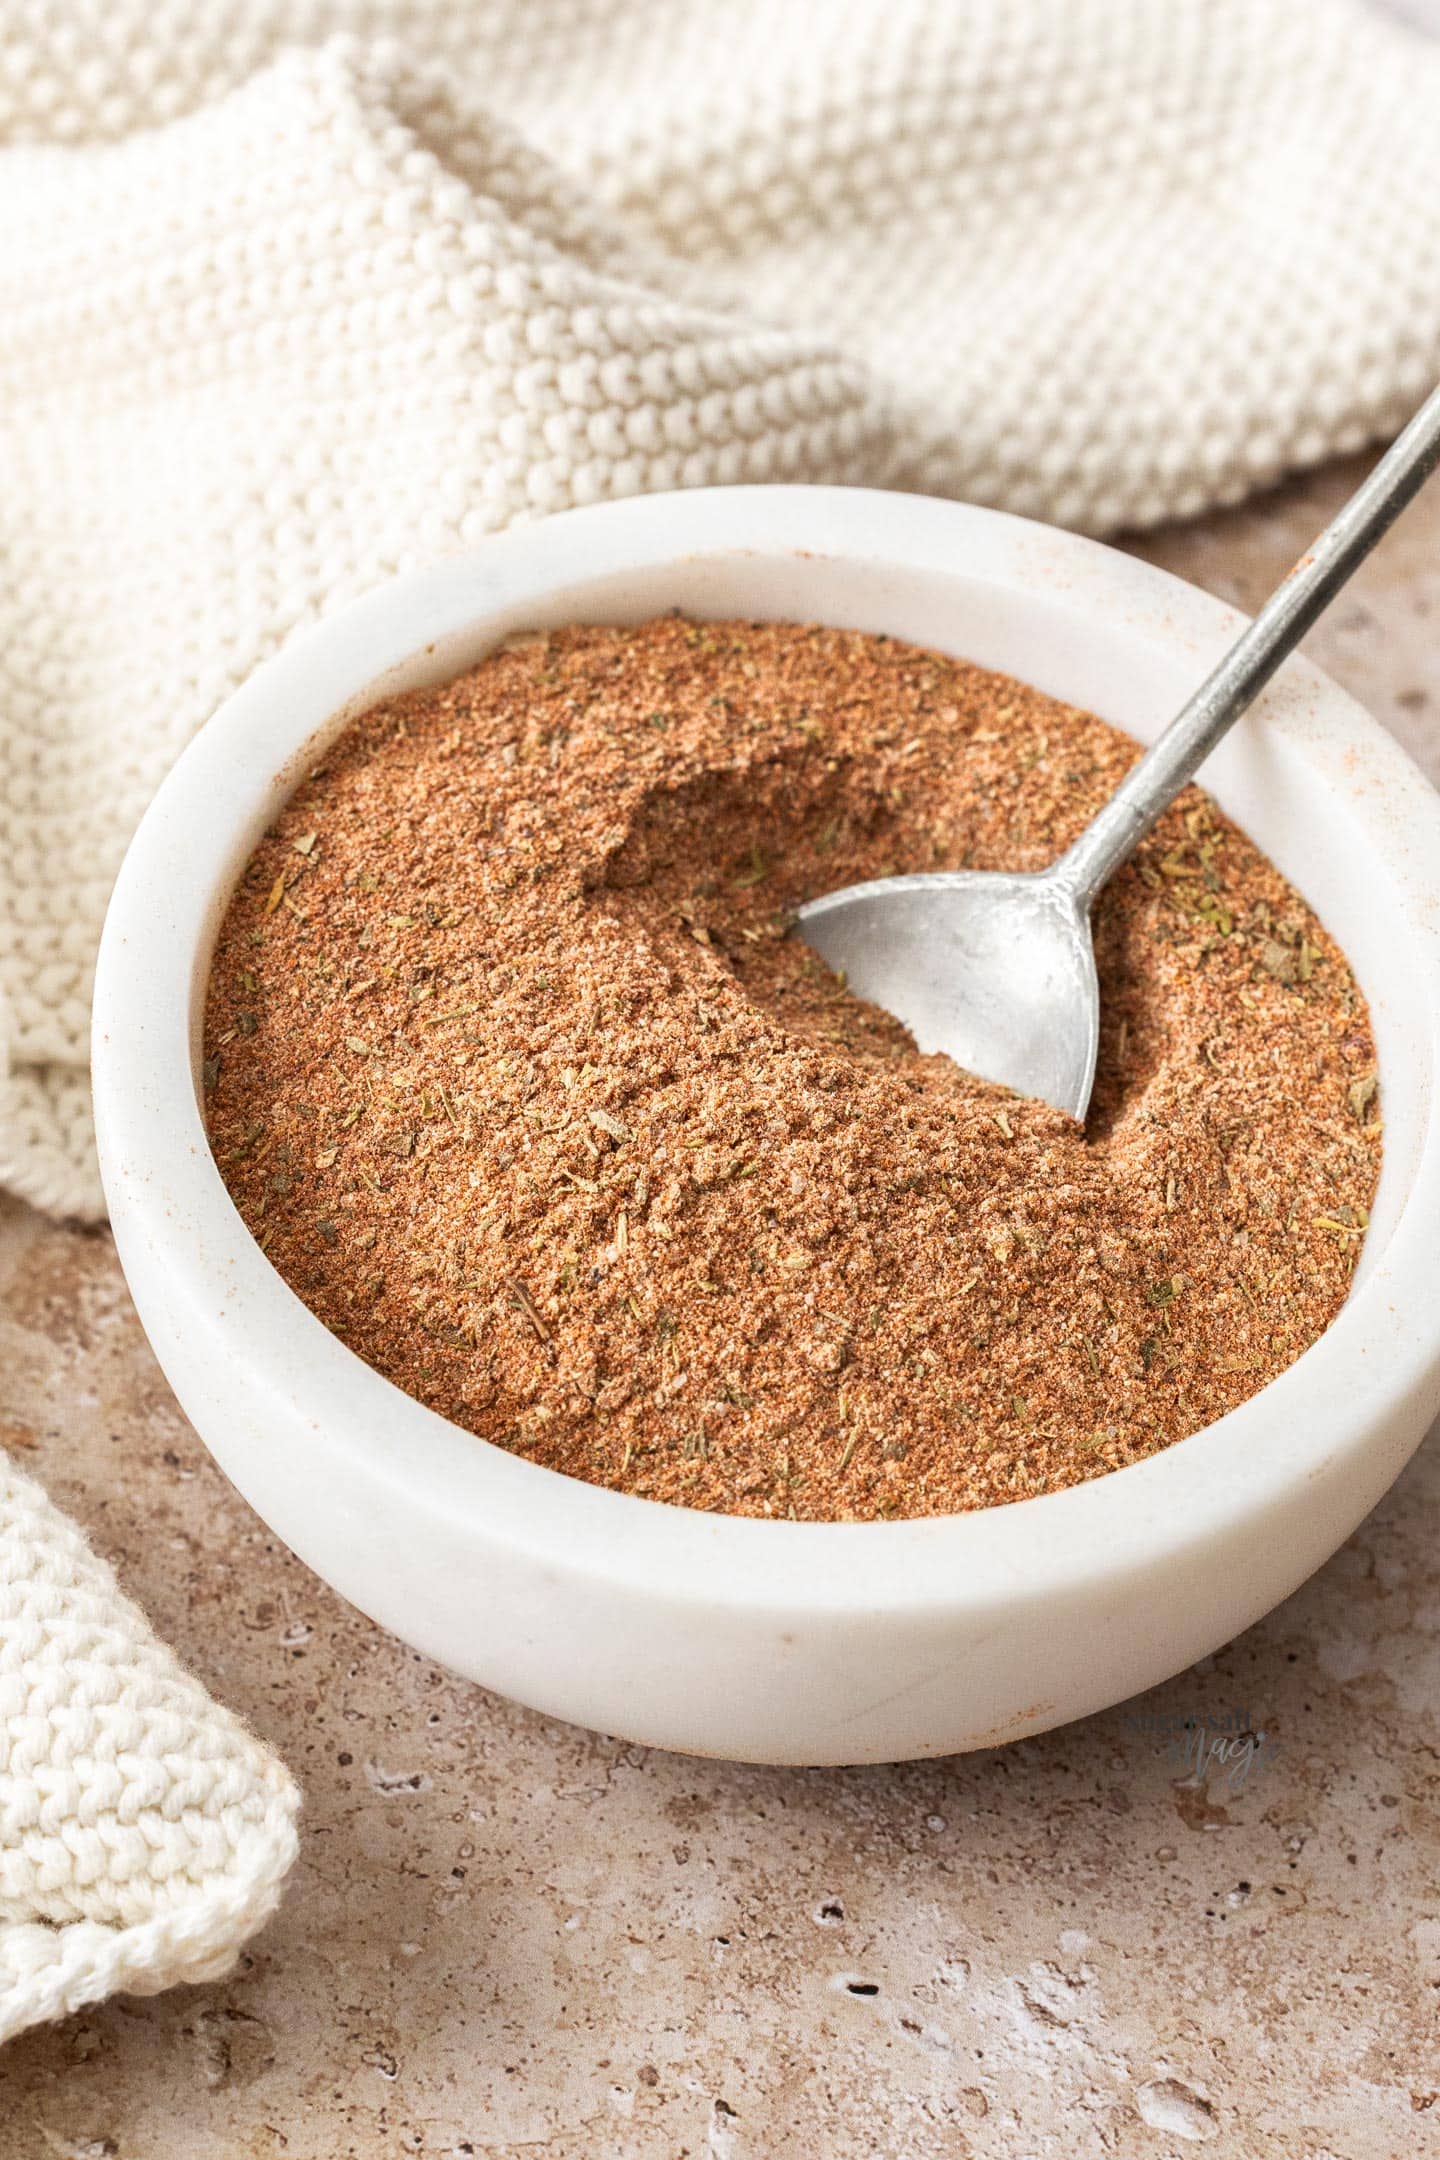 Cajun seasoning in a bowl with a spoon.